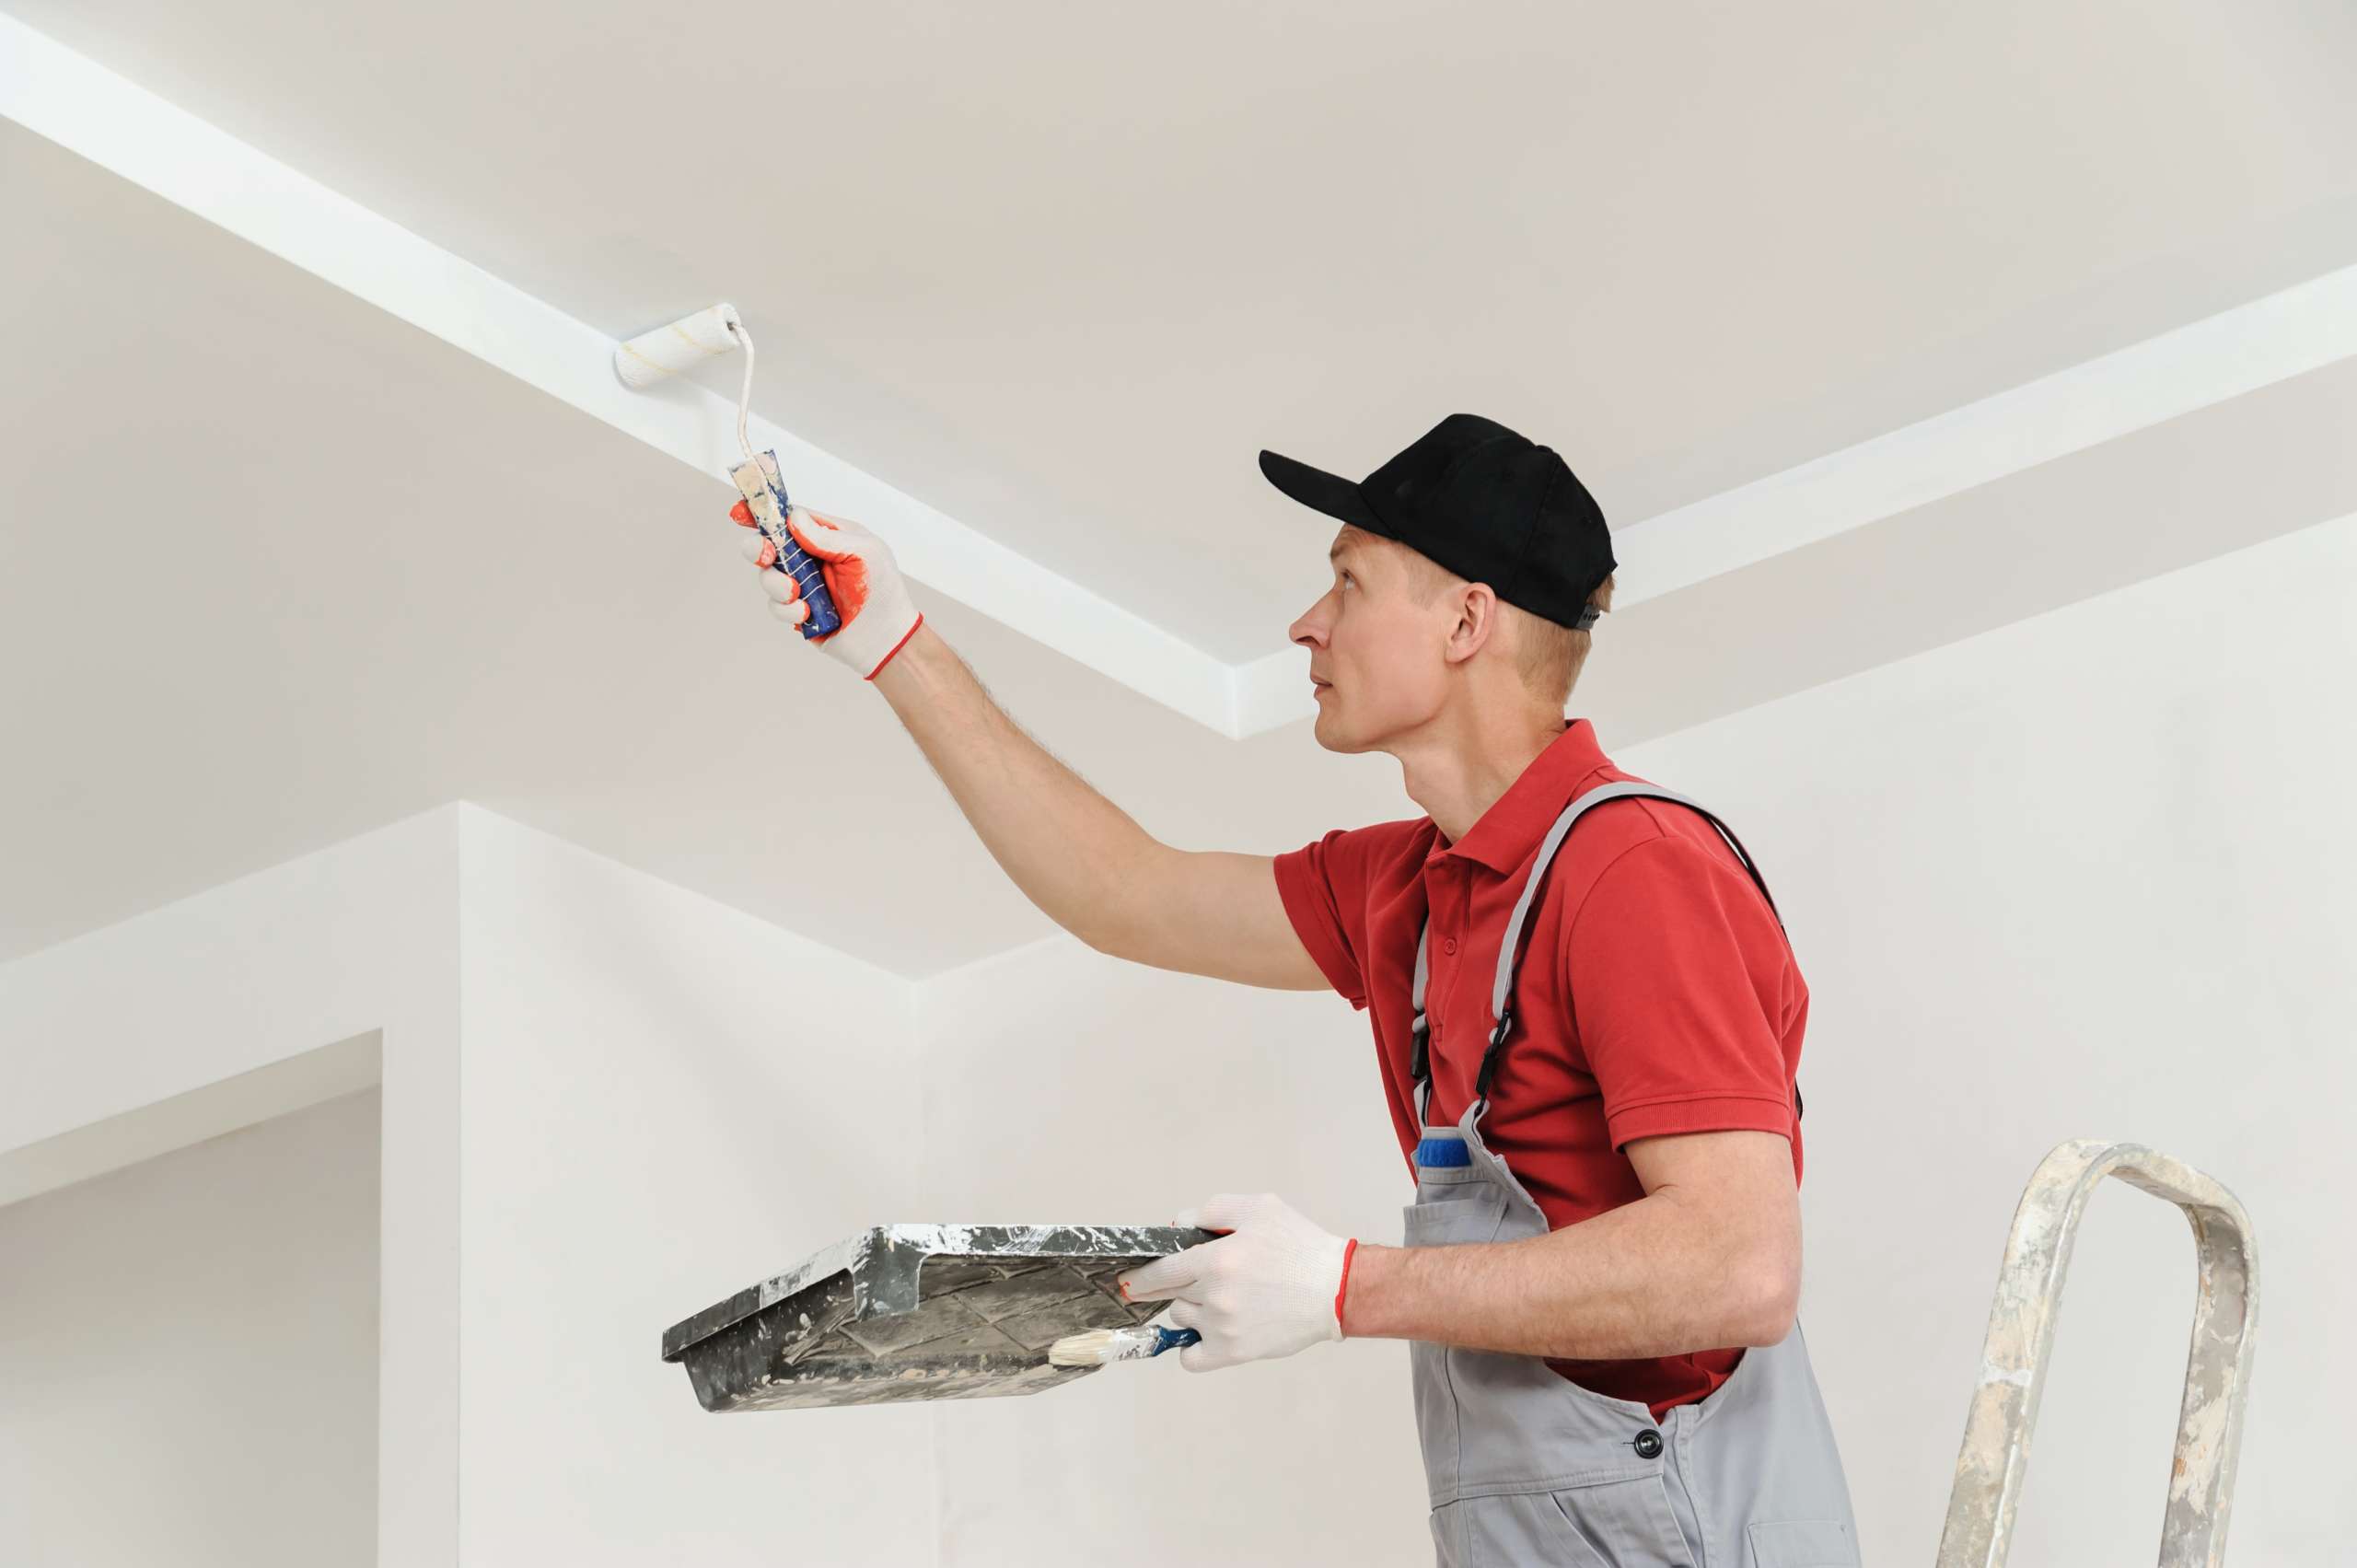 Painting Skills: a painter paints the ceiling walls.